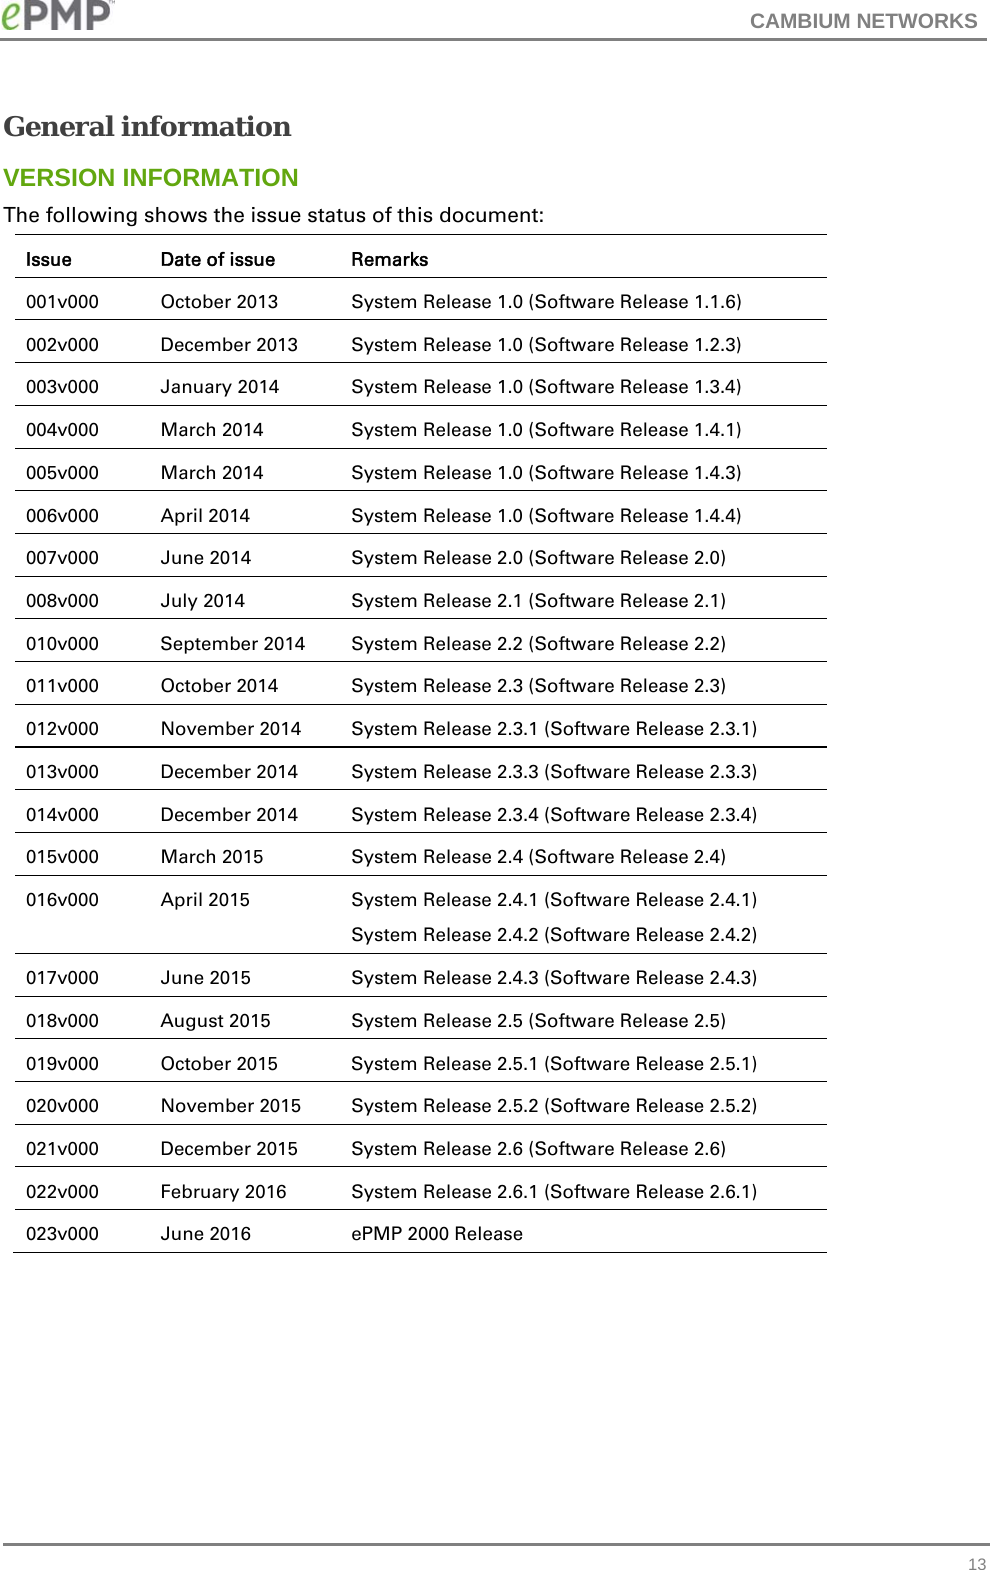 CAMBIUM NETWORKS   13General information VERSION INFORMATION The following shows the issue status of this document: Issue  Date of issue  Remarks 001v000  October 2013  System Release 1.0 (Software Release 1.1.6) 002v000 December 2013 System Release 1.0 (Software Release 1.2.3) 003v000  January 2014  System Release 1.0 (Software Release 1.3.4) 004v000  March 2014  System Release 1.0 (Software Release 1.4.1) 005v000  March 2014  System Release 1.0 (Software Release 1.4.3) 006v000  April 2014  System Release 1.0 (Software Release 1.4.4) 007v000  June 2014  System Release 2.0 (Software Release 2.0) 008v000  July 2014  System Release 2.1 (Software Release 2.1) 010v000  September 2014  System Release 2.2 (Software Release 2.2) 011v000  October 2014  System Release 2.3 (Software Release 2.3) 012v000  November 2014  System Release 2.3.1 (Software Release 2.3.1) 013v000 December 2014 System Release 2.3.3 (Software Release 2.3.3) 014v000 December 2014 System Release 2.3.4 (Software Release 2.3.4) 015v000  March 2015  System Release 2.4 (Software Release 2.4) 016v000  April 2015  System Release 2.4.1 (Software Release 2.4.1) System Release 2.4.2 (Software Release 2.4.2) 017v000  June 2015  System Release 2.4.3 (Software Release 2.4.3) 018v000  August 2015  System Release 2.5 (Software Release 2.5) 019v000  October 2015  System Release 2.5.1 (Software Release 2.5.1) 020v000  November 2015  System Release 2.5.2 (Software Release 2.5.2) 021v000 December 2015 System Release 2.6 (Software Release 2.6) 022v000  February 2016  System Release 2.6.1 (Software Release 2.6.1) 023v000  June 2016  ePMP 2000 Release    